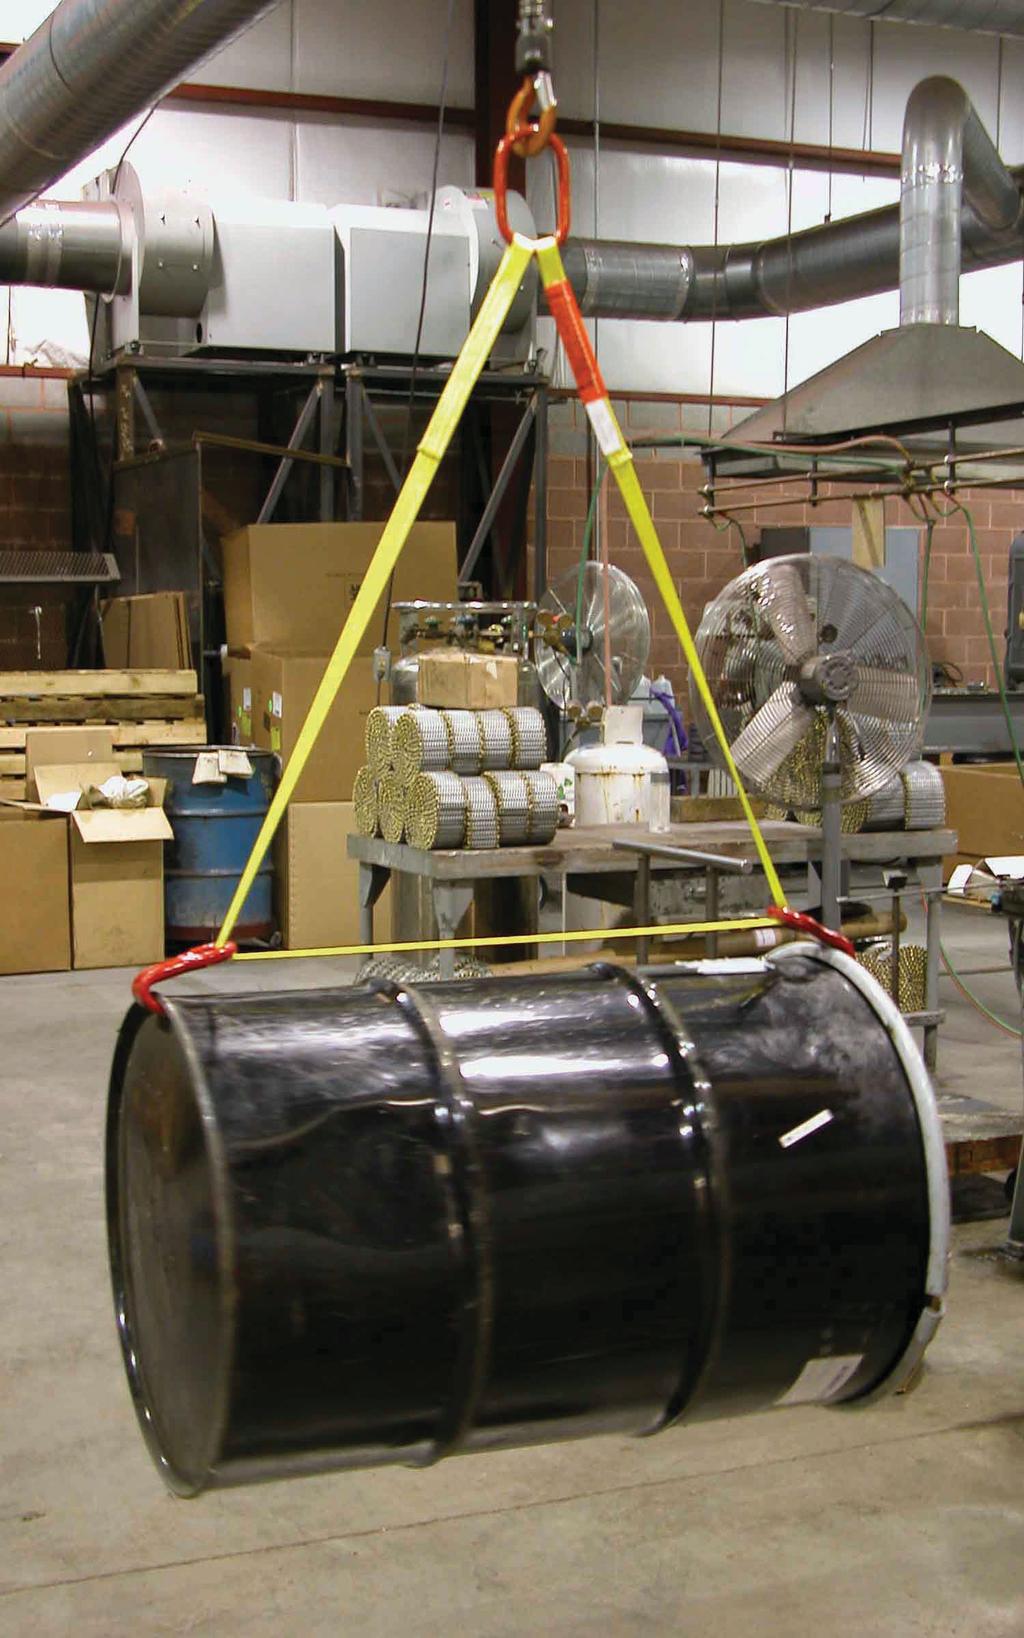 Lift-All Drum Handling Slings provide an easy, inexpensive way to handle steel drums. Available in two styles to suit your needs for handling drums in the vertical or horizontal position.